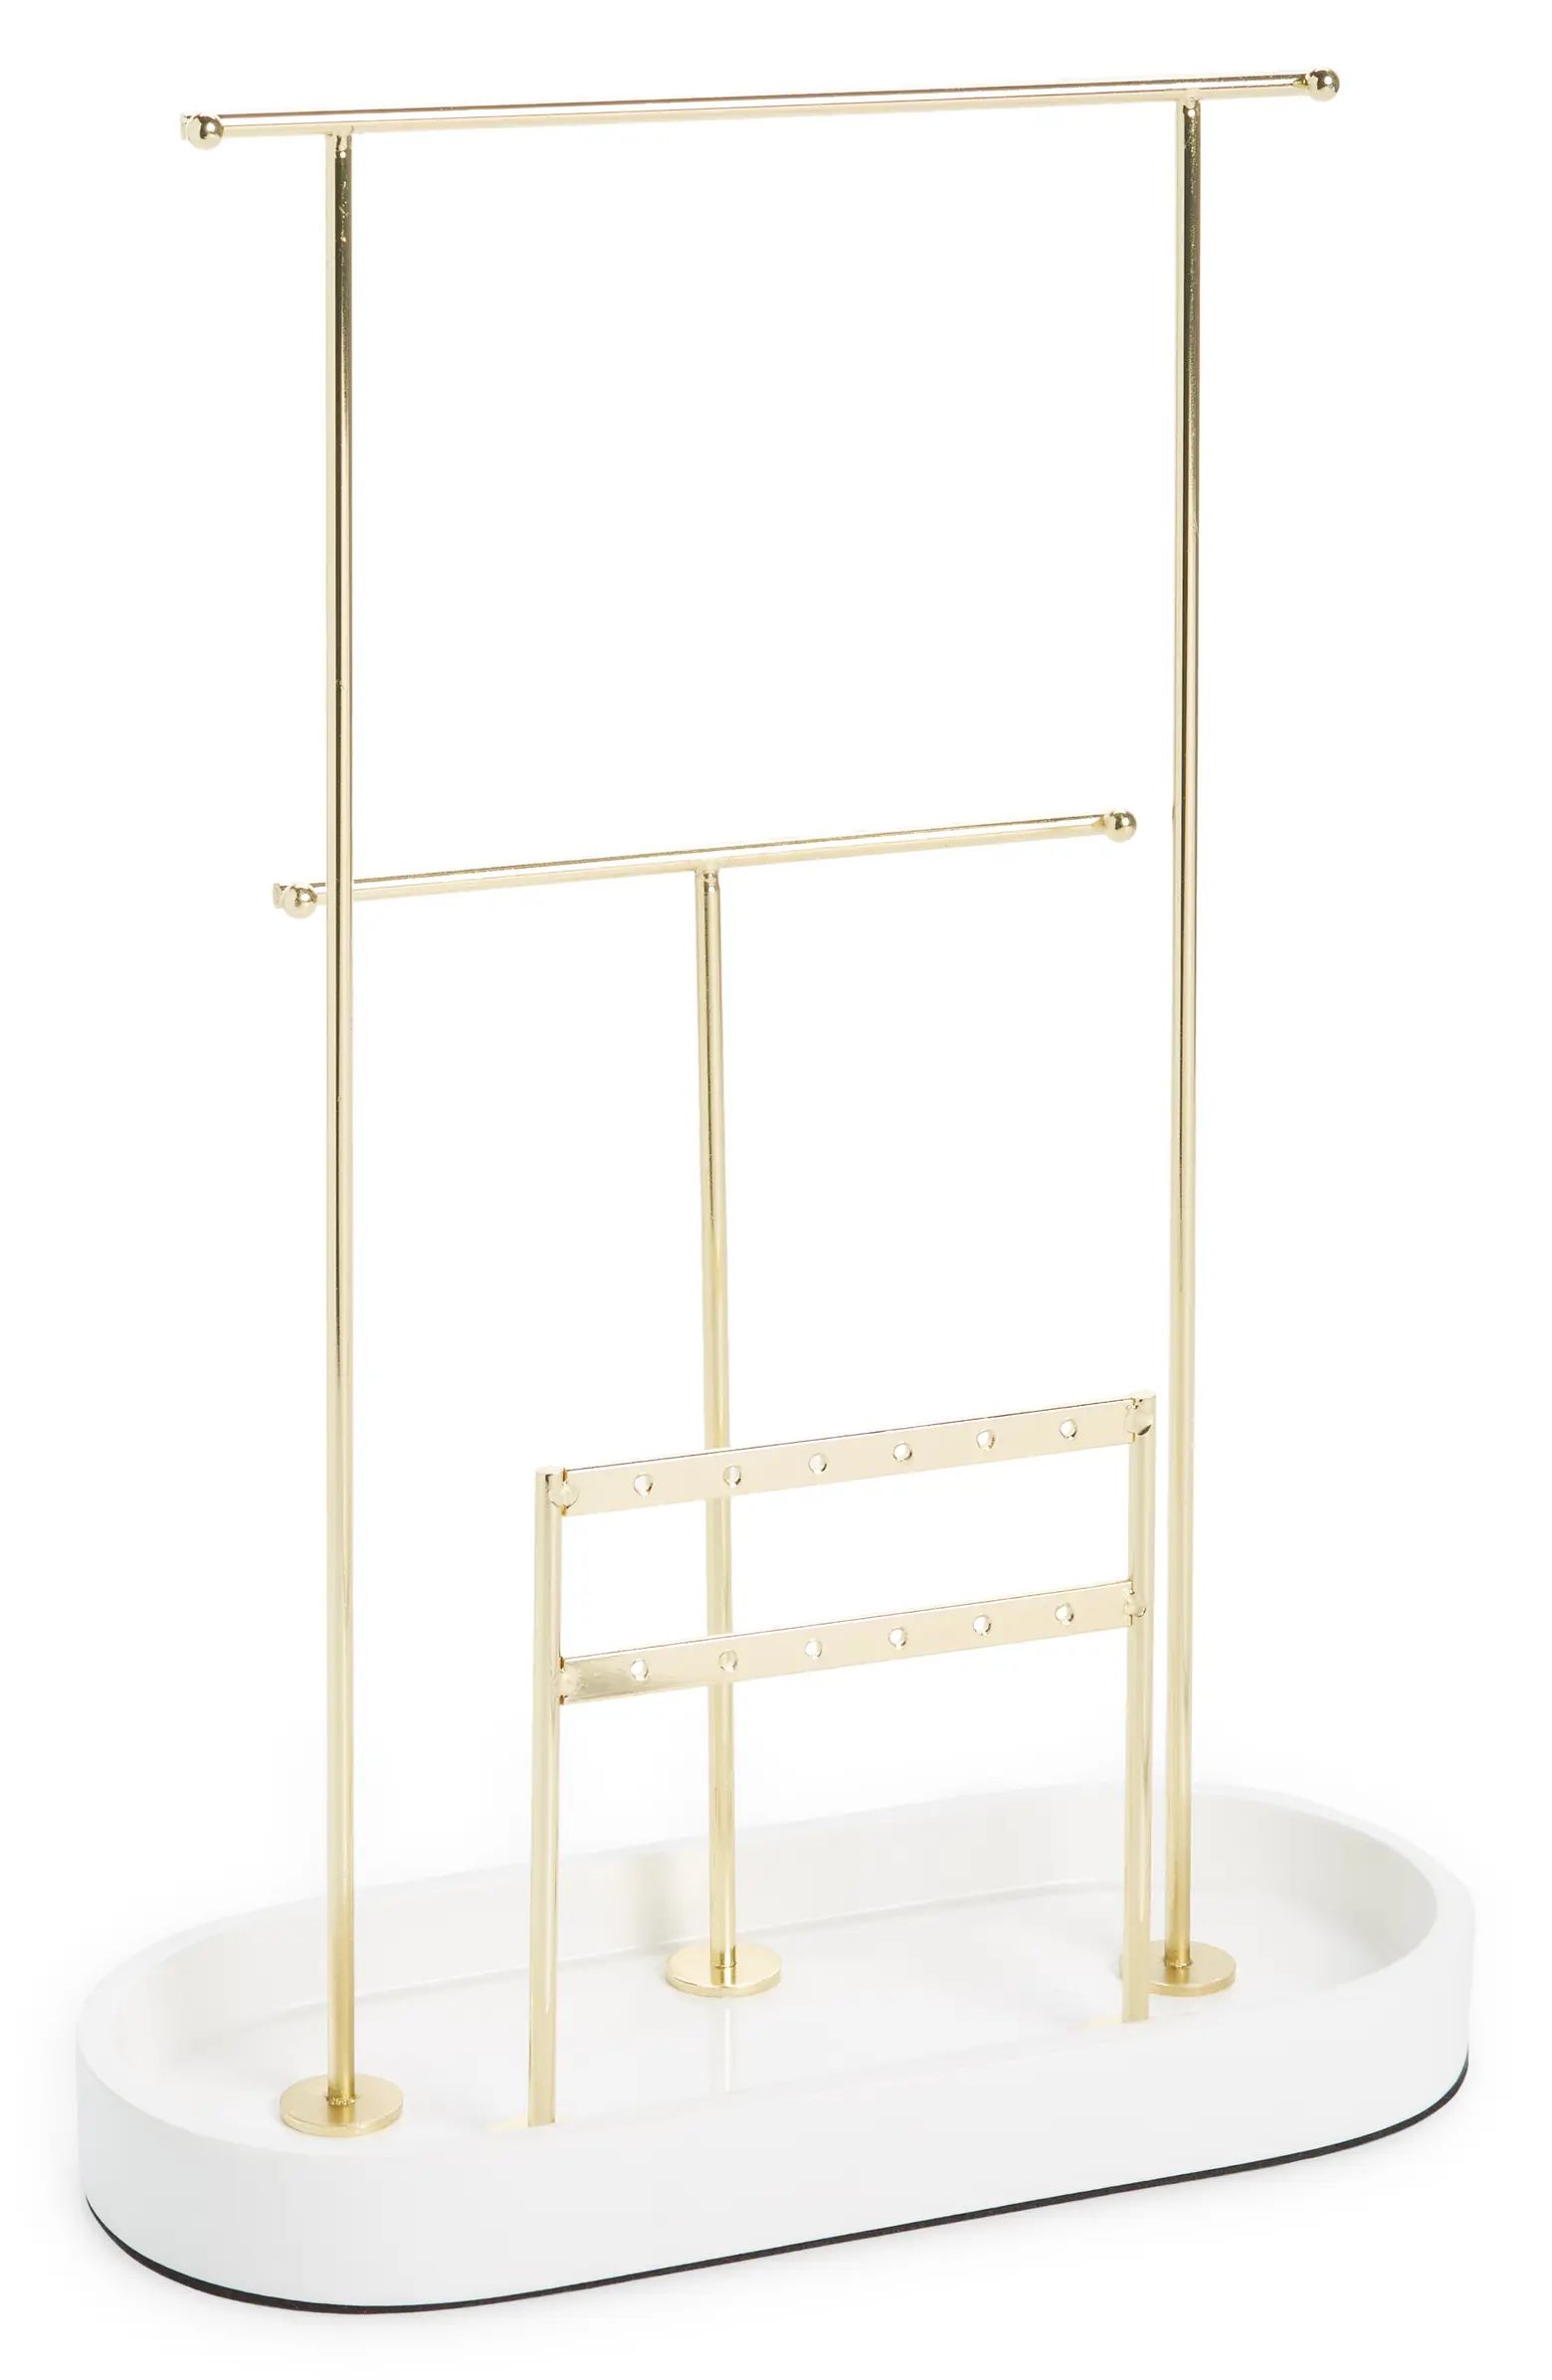 Nordstrom Jewelry Stand | Nordstrom | Nordstrom